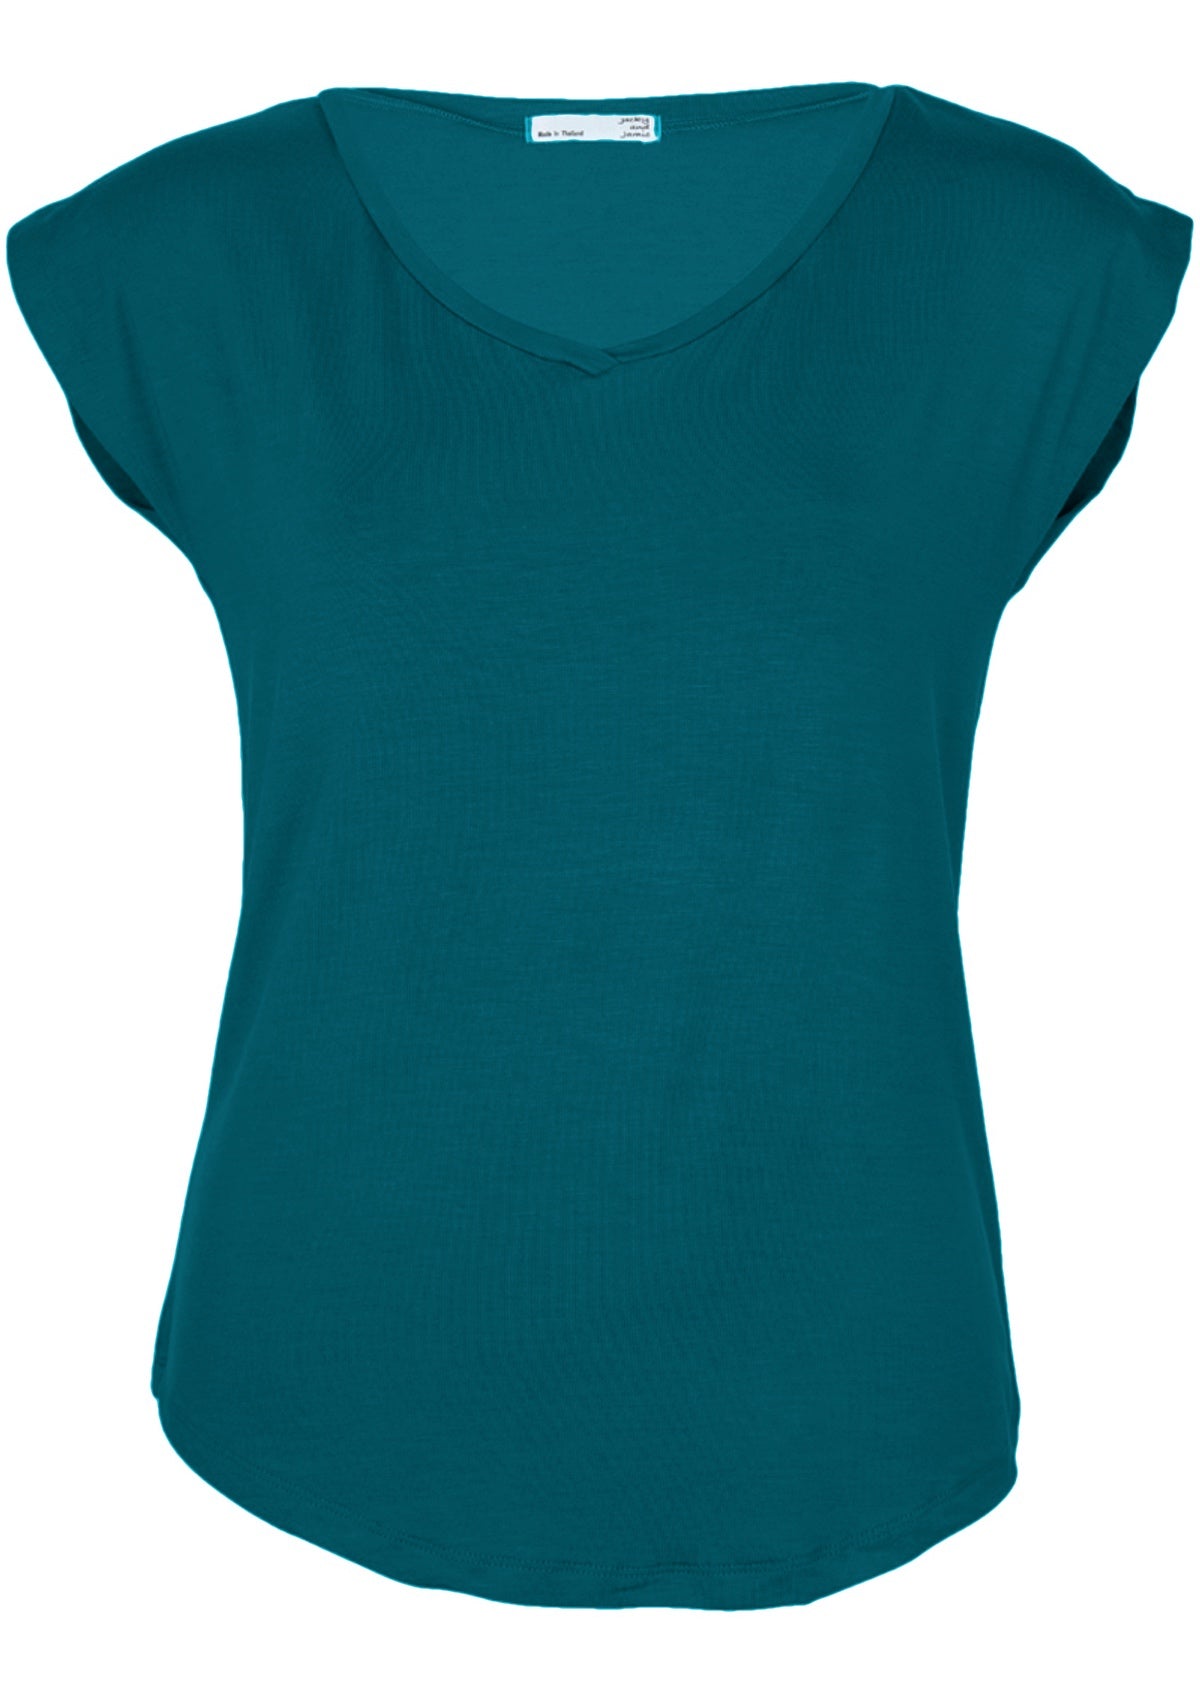 Front view of women's teal v-neck short cap sleeve rayon top.